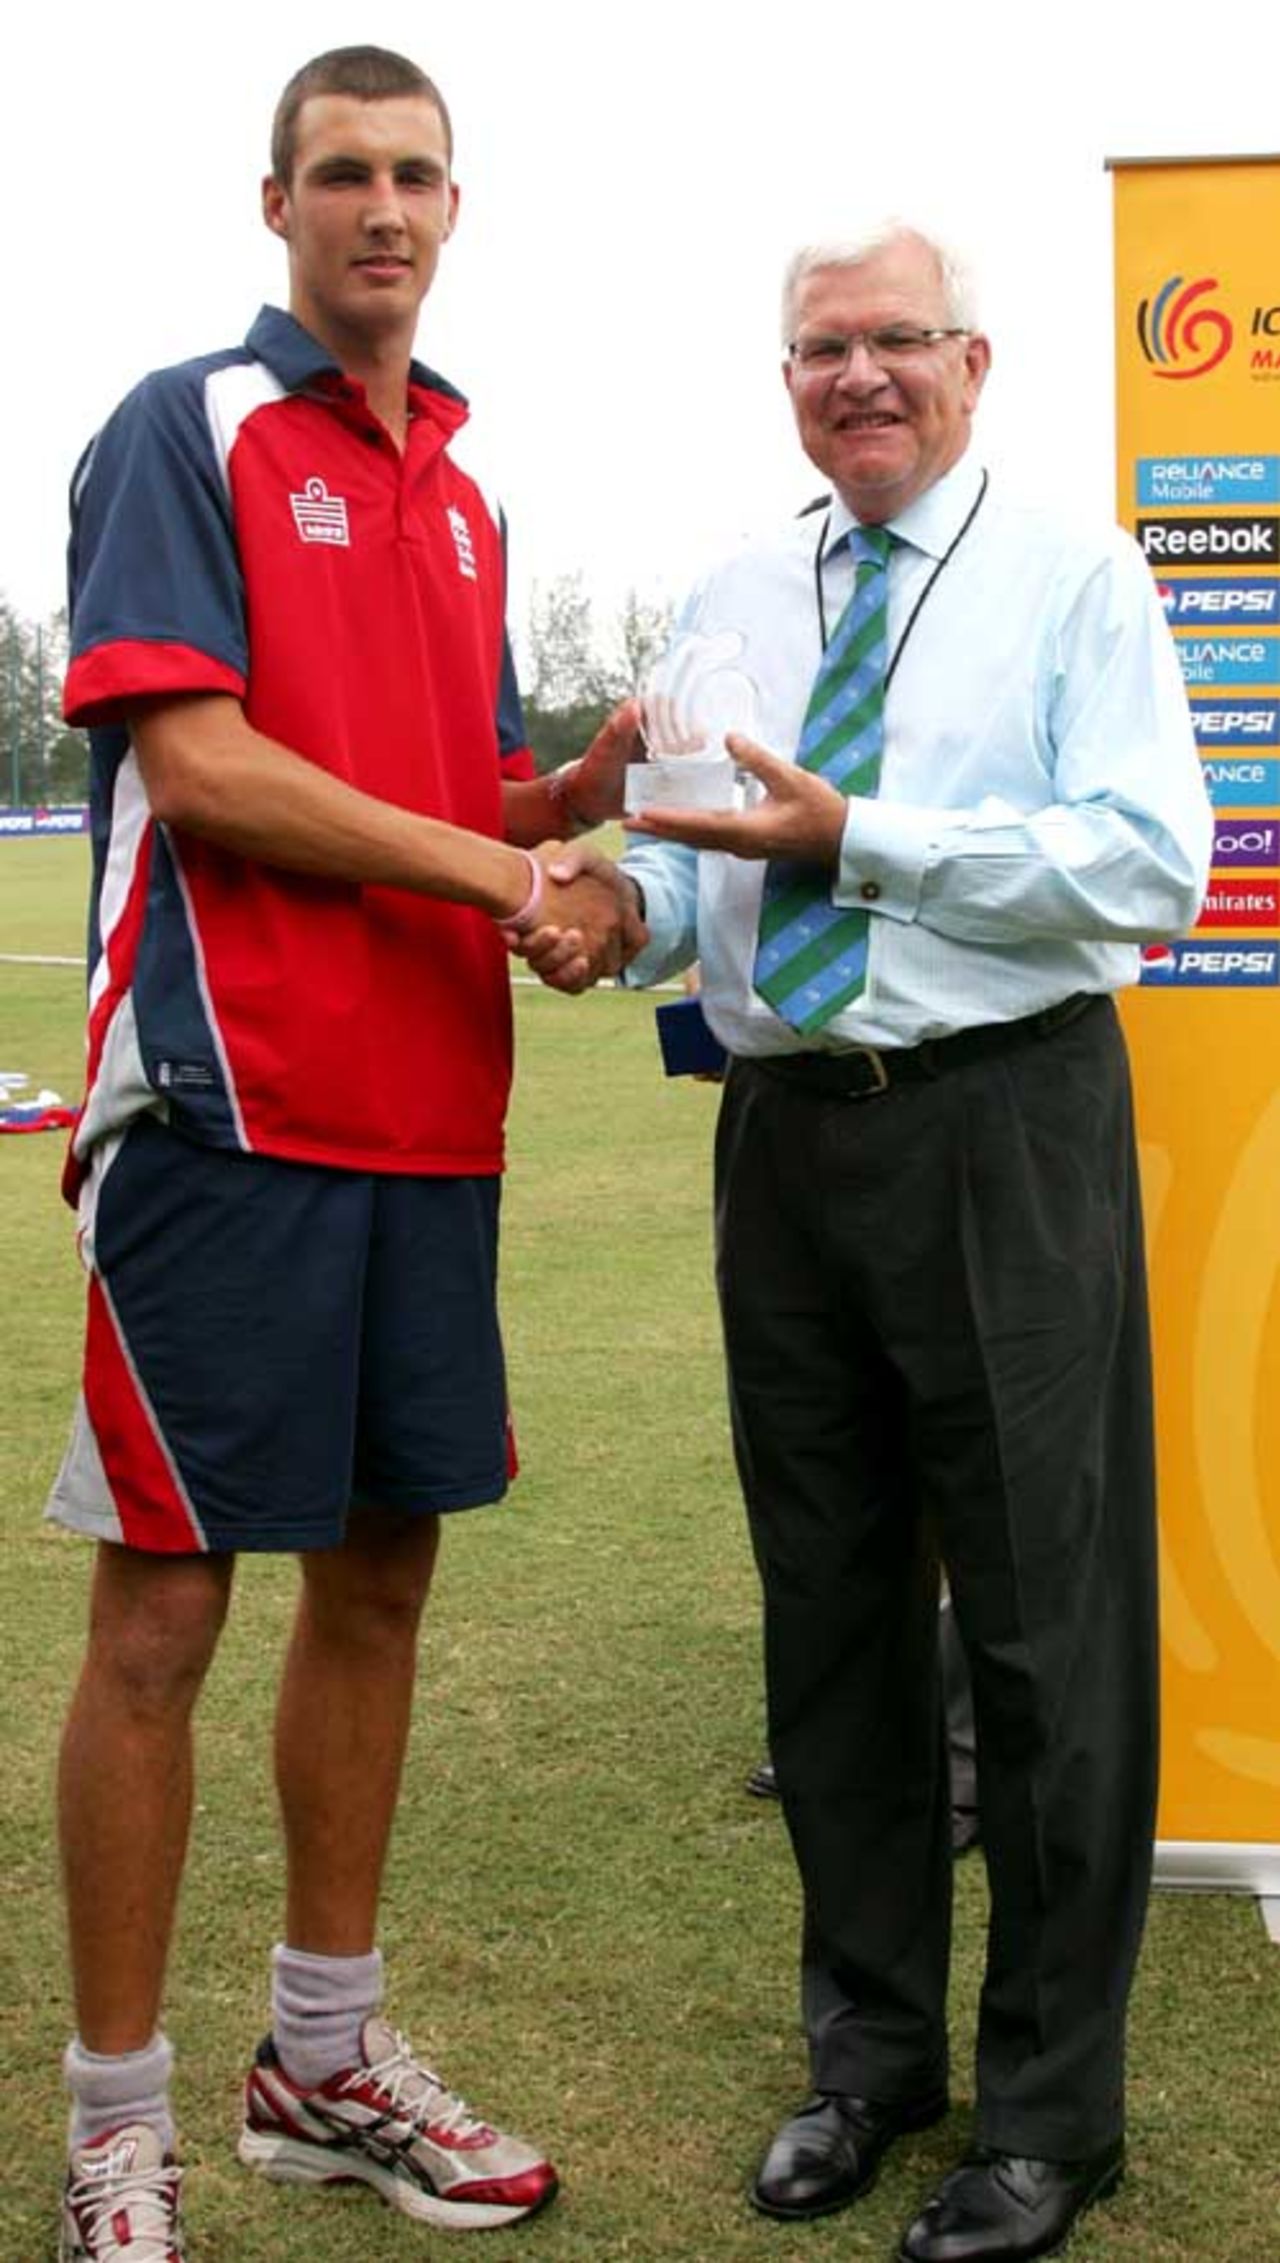 England's Steven Finn receives the Man-of-the-Match award from ICC chief executive Malcolm Speed, England U-19s v Ireland U-19s, Group D, Under-19 World Cup, Kuala Lumpur, February 17, 2008 